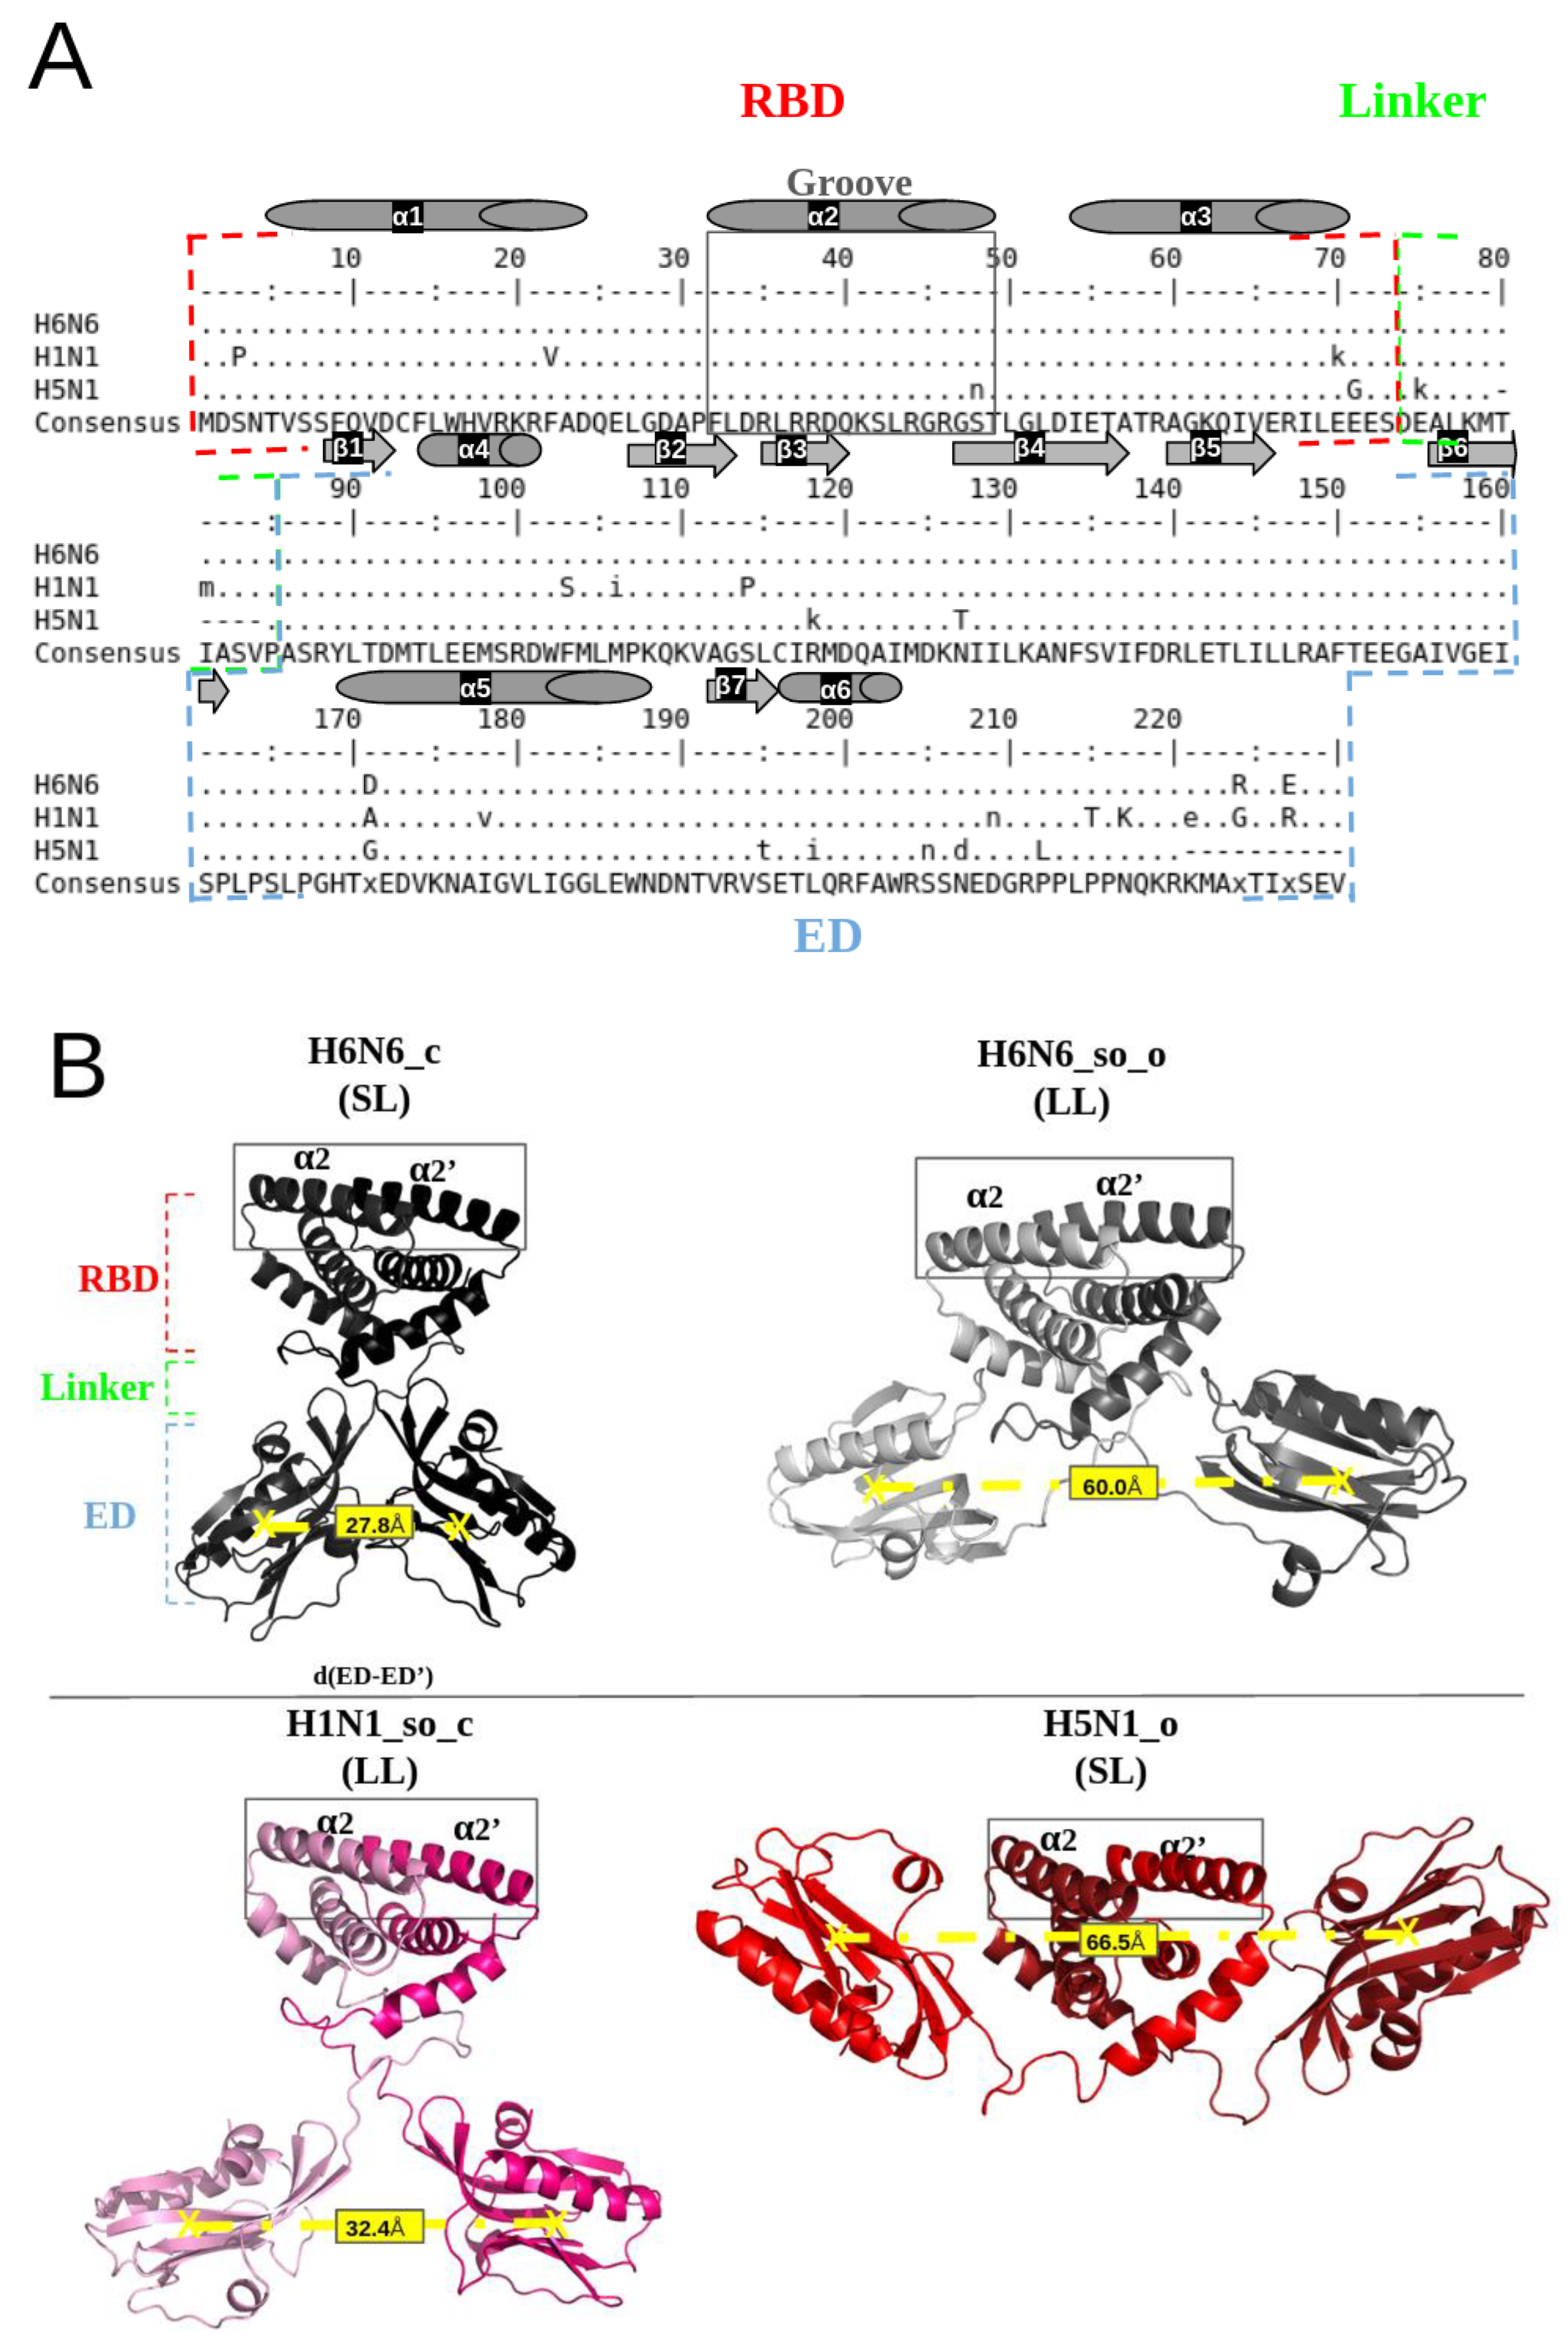 Biomolecules | Free Full-Text | Druggable Pockets at the Interface Region of Influenza A NS1 Are Conserved across Sequence Variants from Distinct Subtypes